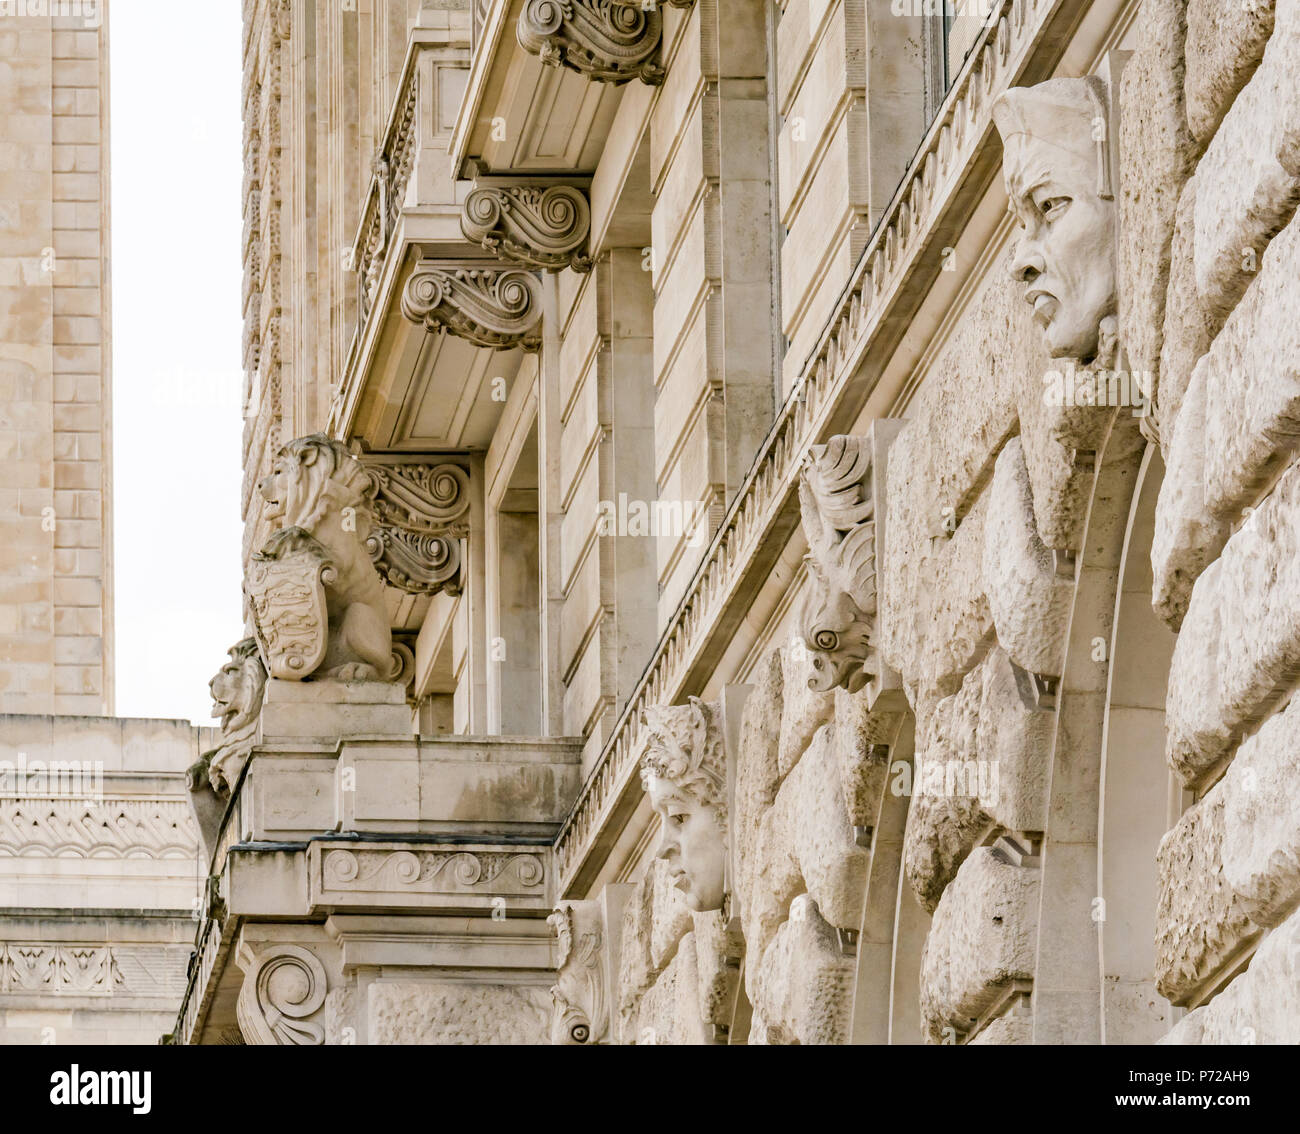 Quirky stone faces above windows in Italian Renaissance Greek revival architecture style Cunard building, Liverpool, England, UK Stock Photo